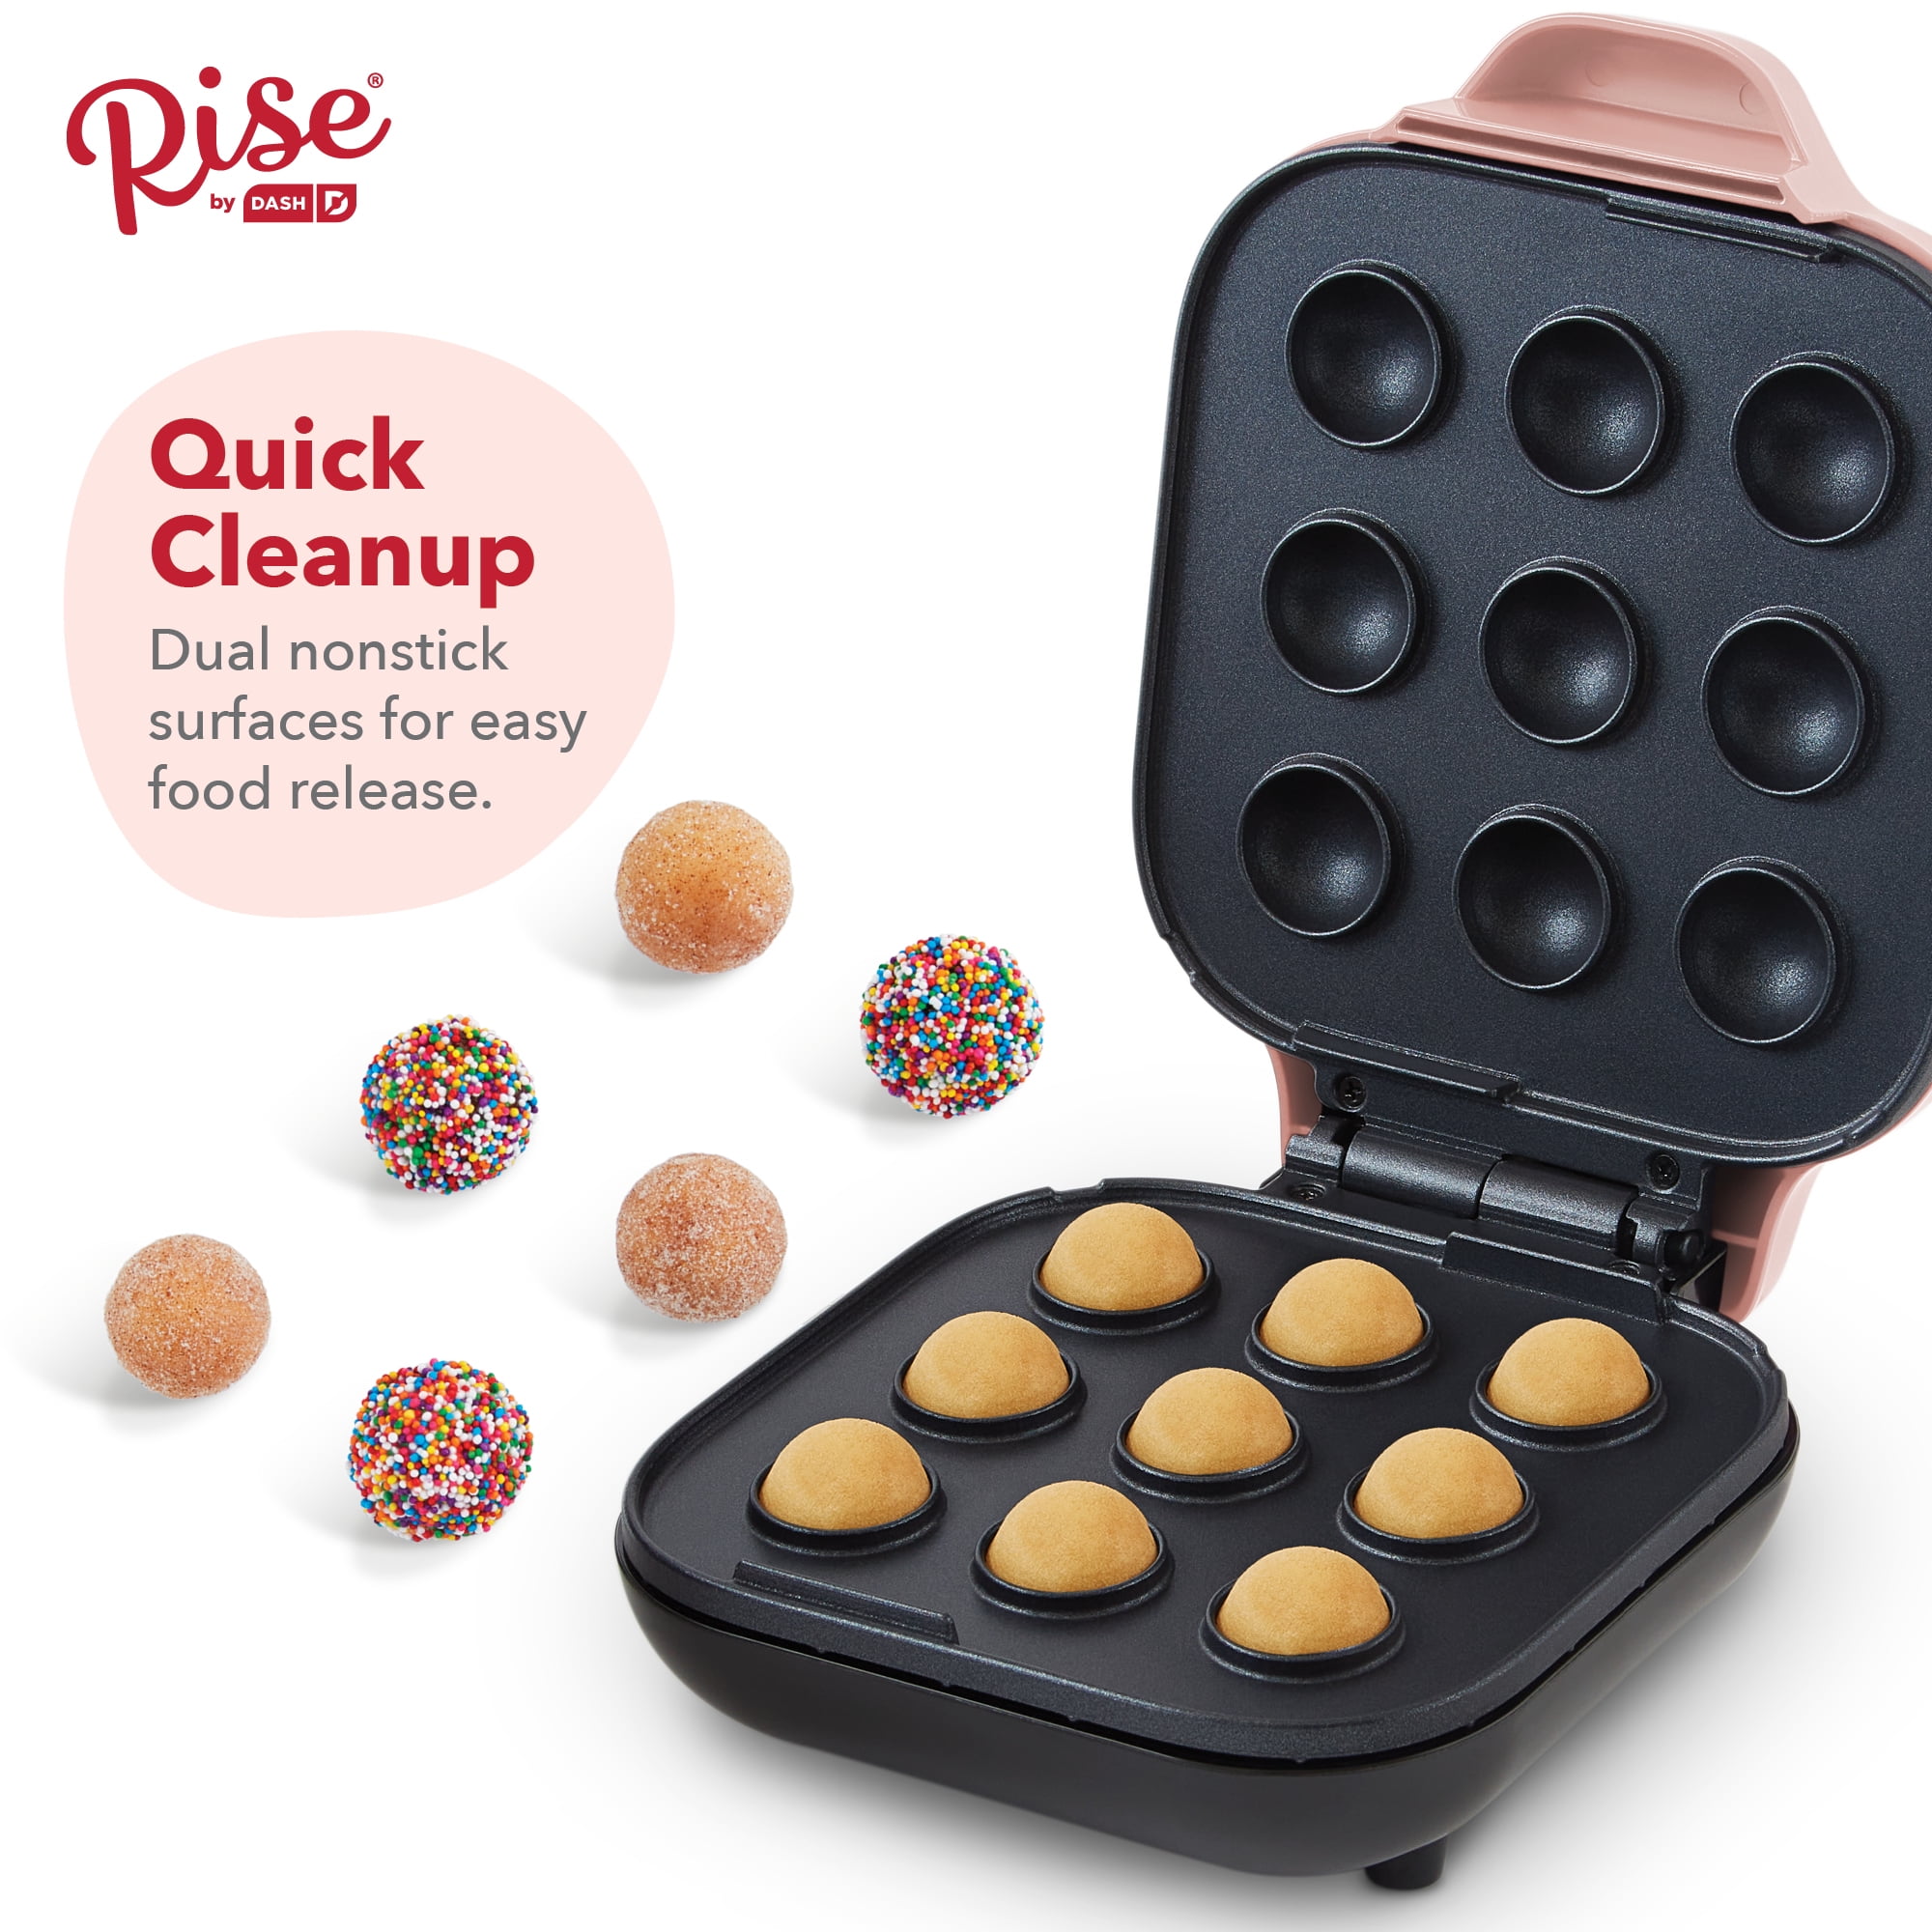 Rise by Dash Donut Bite Maker, Pink - Makes 9 Donut Bites - 4 in x